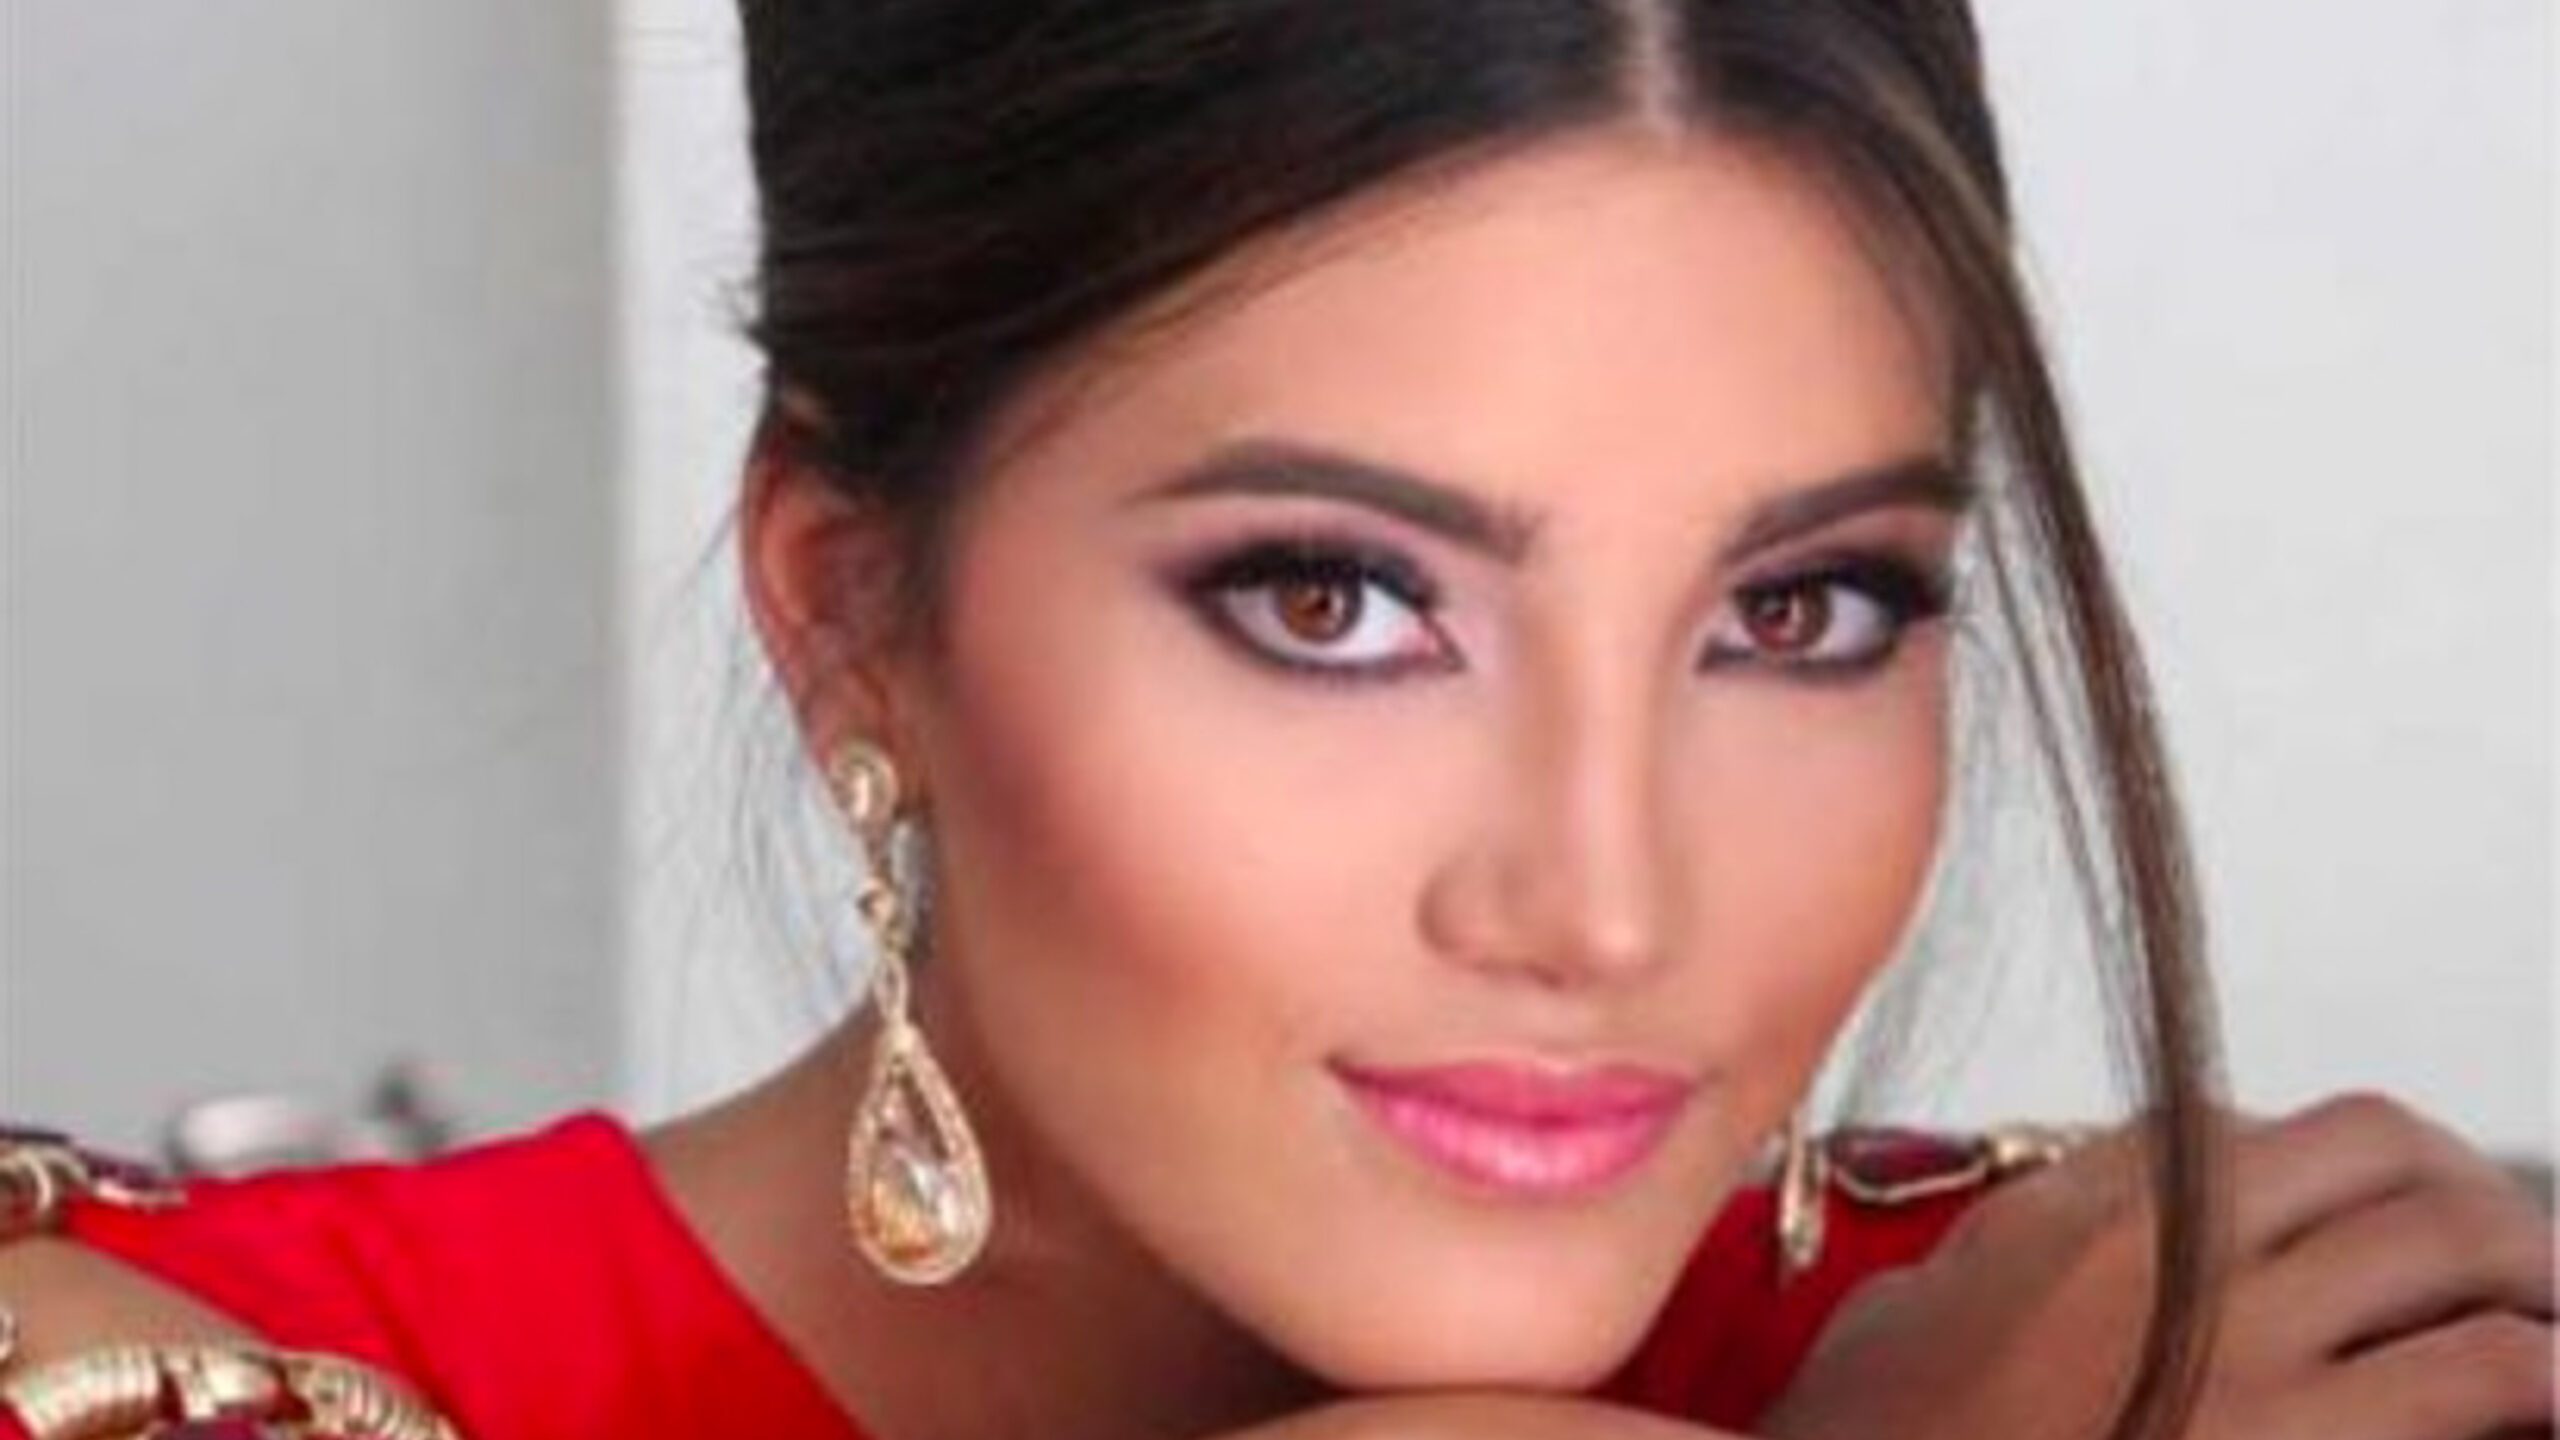 Puerto Rico’s Stephanie del Valle crowned Miss World 2016